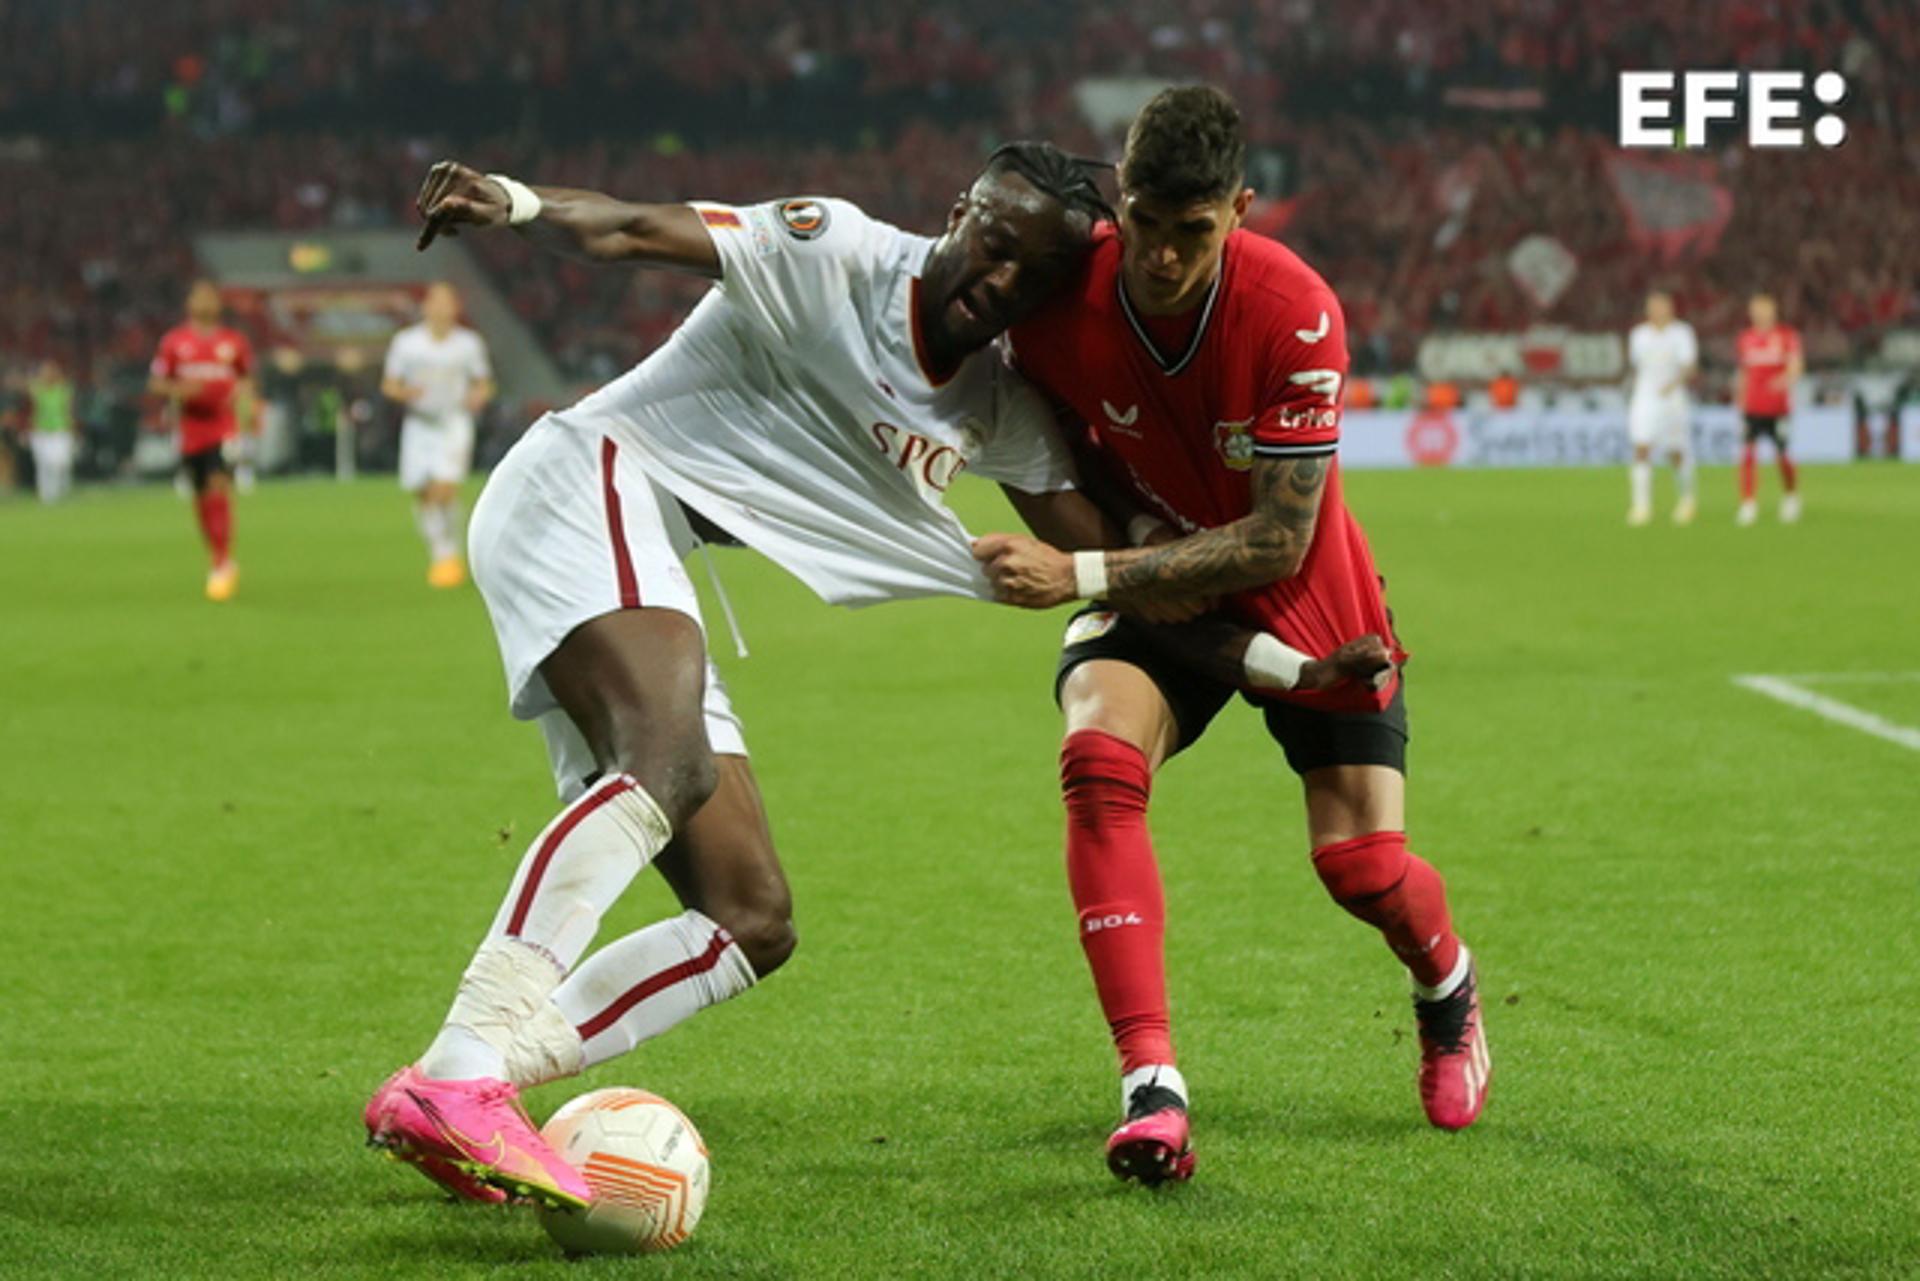 AS Roma's Tammy Abraham (L) in action against Bayer Leverkusen's Piero Hincapie during the UEFA Europa League semifinal second leg in Leverkusen, Germany, on 18 May 2023. EFE/EPA/FRIEDEMANN VOGEL
